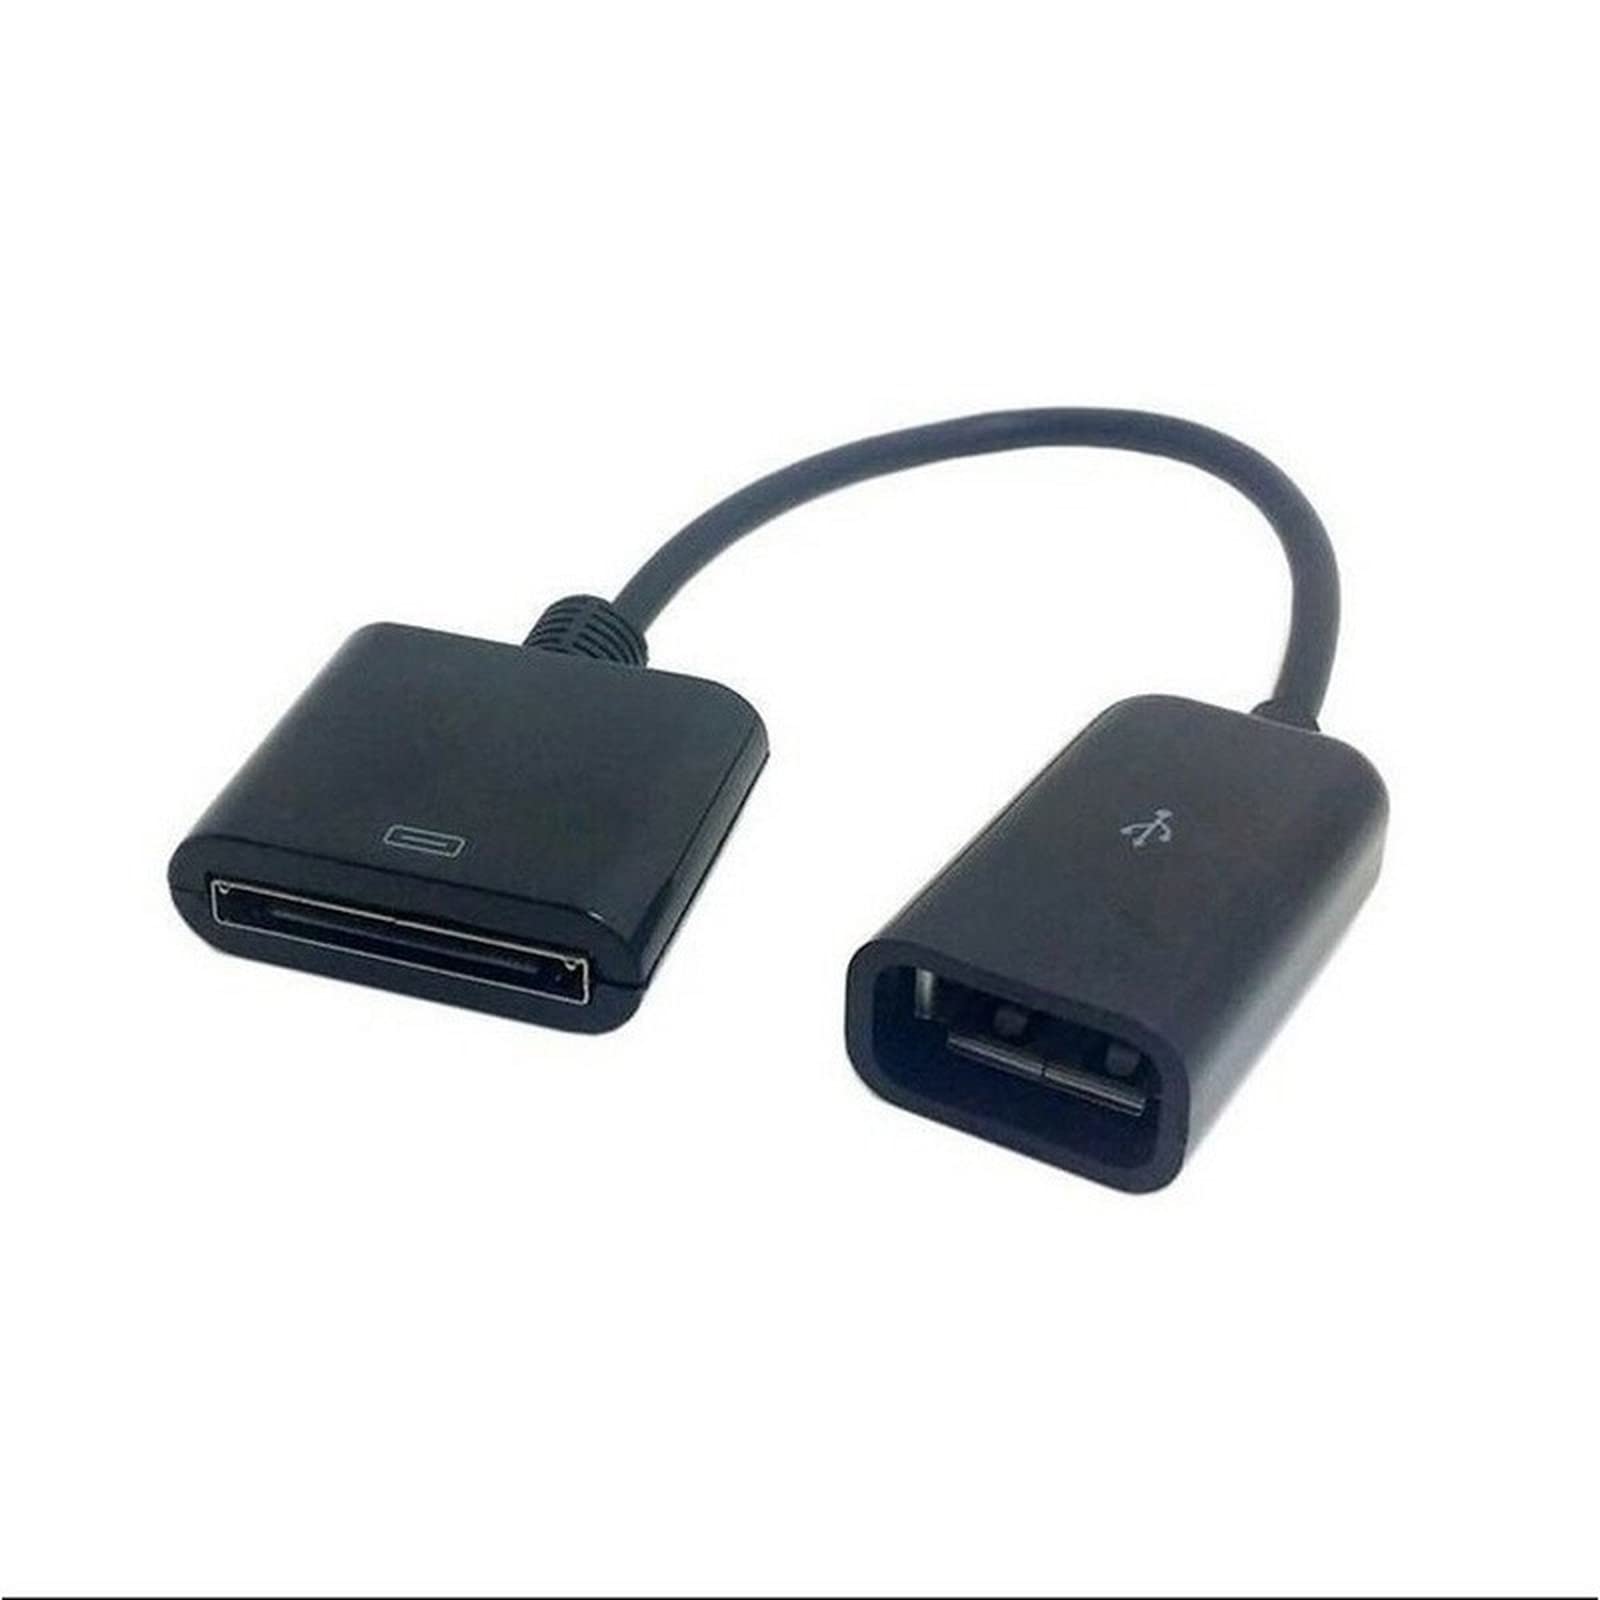 10cm Black Docking 30pin Female to USB 2.0 Female Data Charge Cable for Apple iPhone Ipad Support USB Flash Disk Keyboard Mouse Card Reader